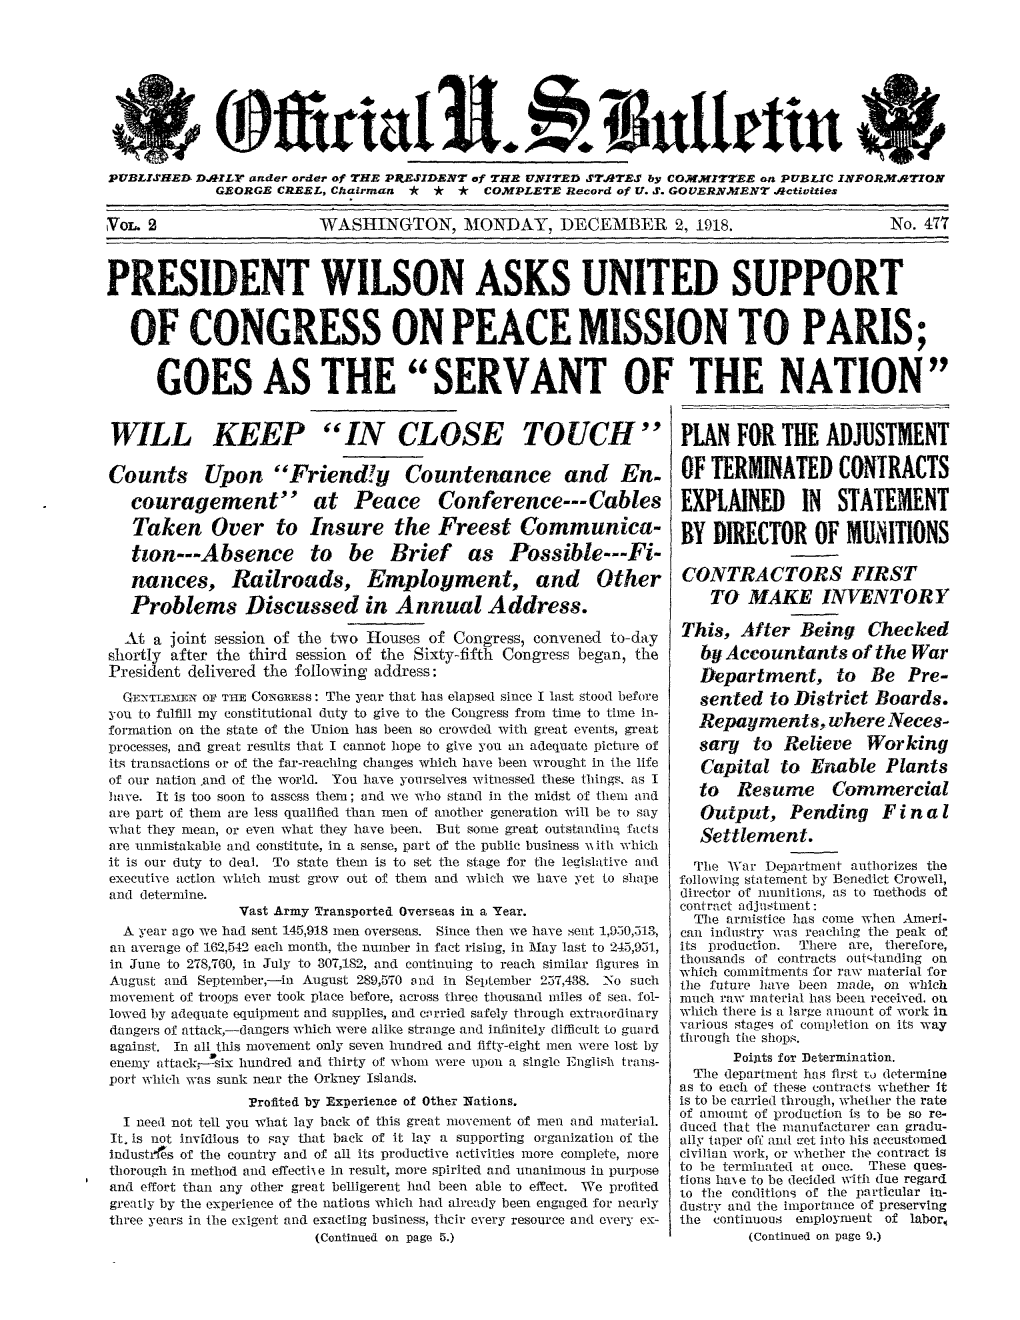 President Wilson Asks United Support of Congress On